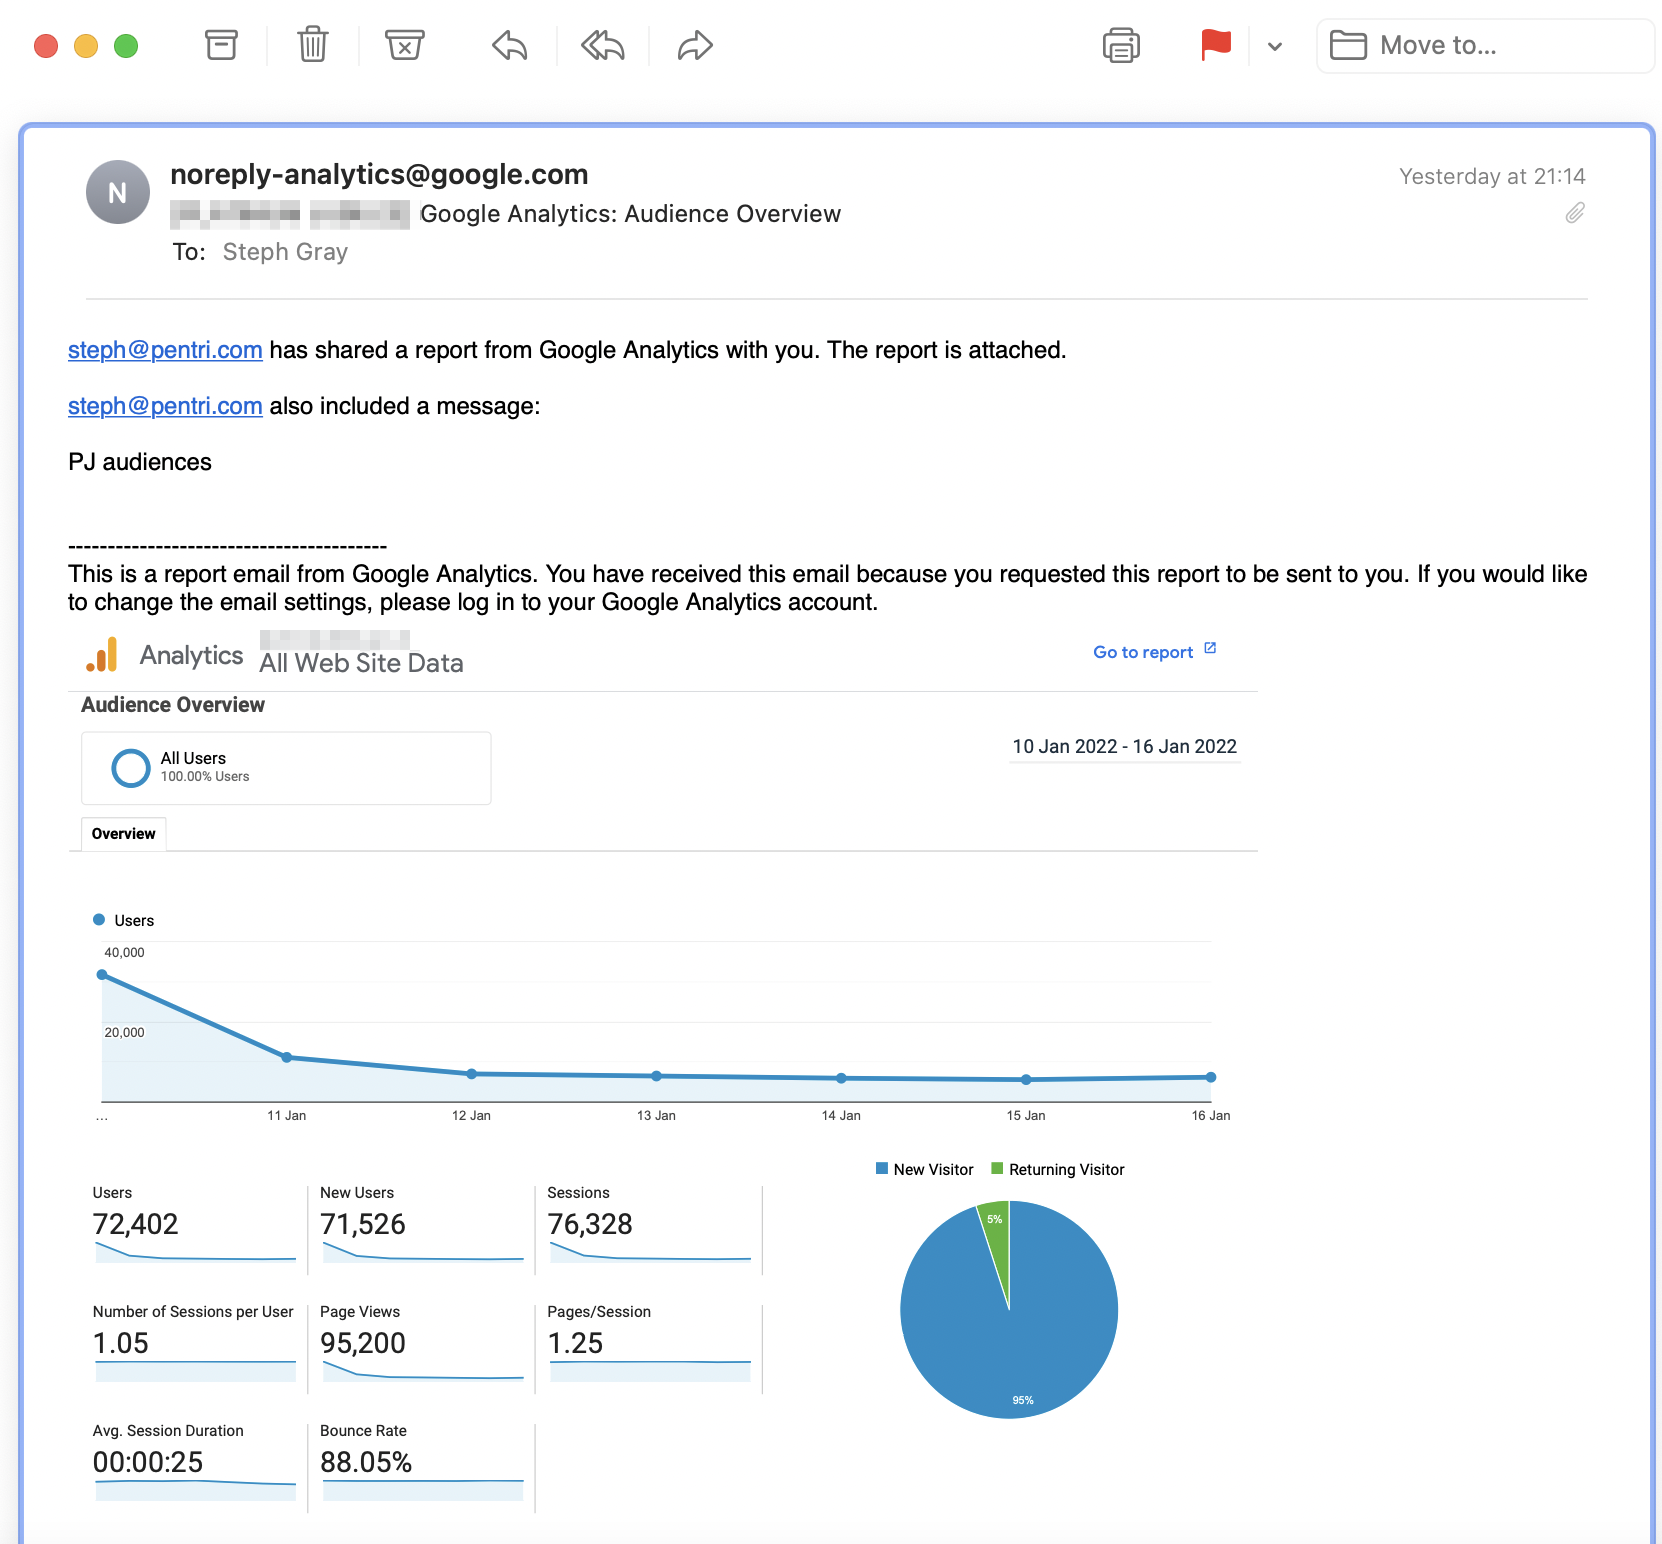 Google Analytics PDF report by email